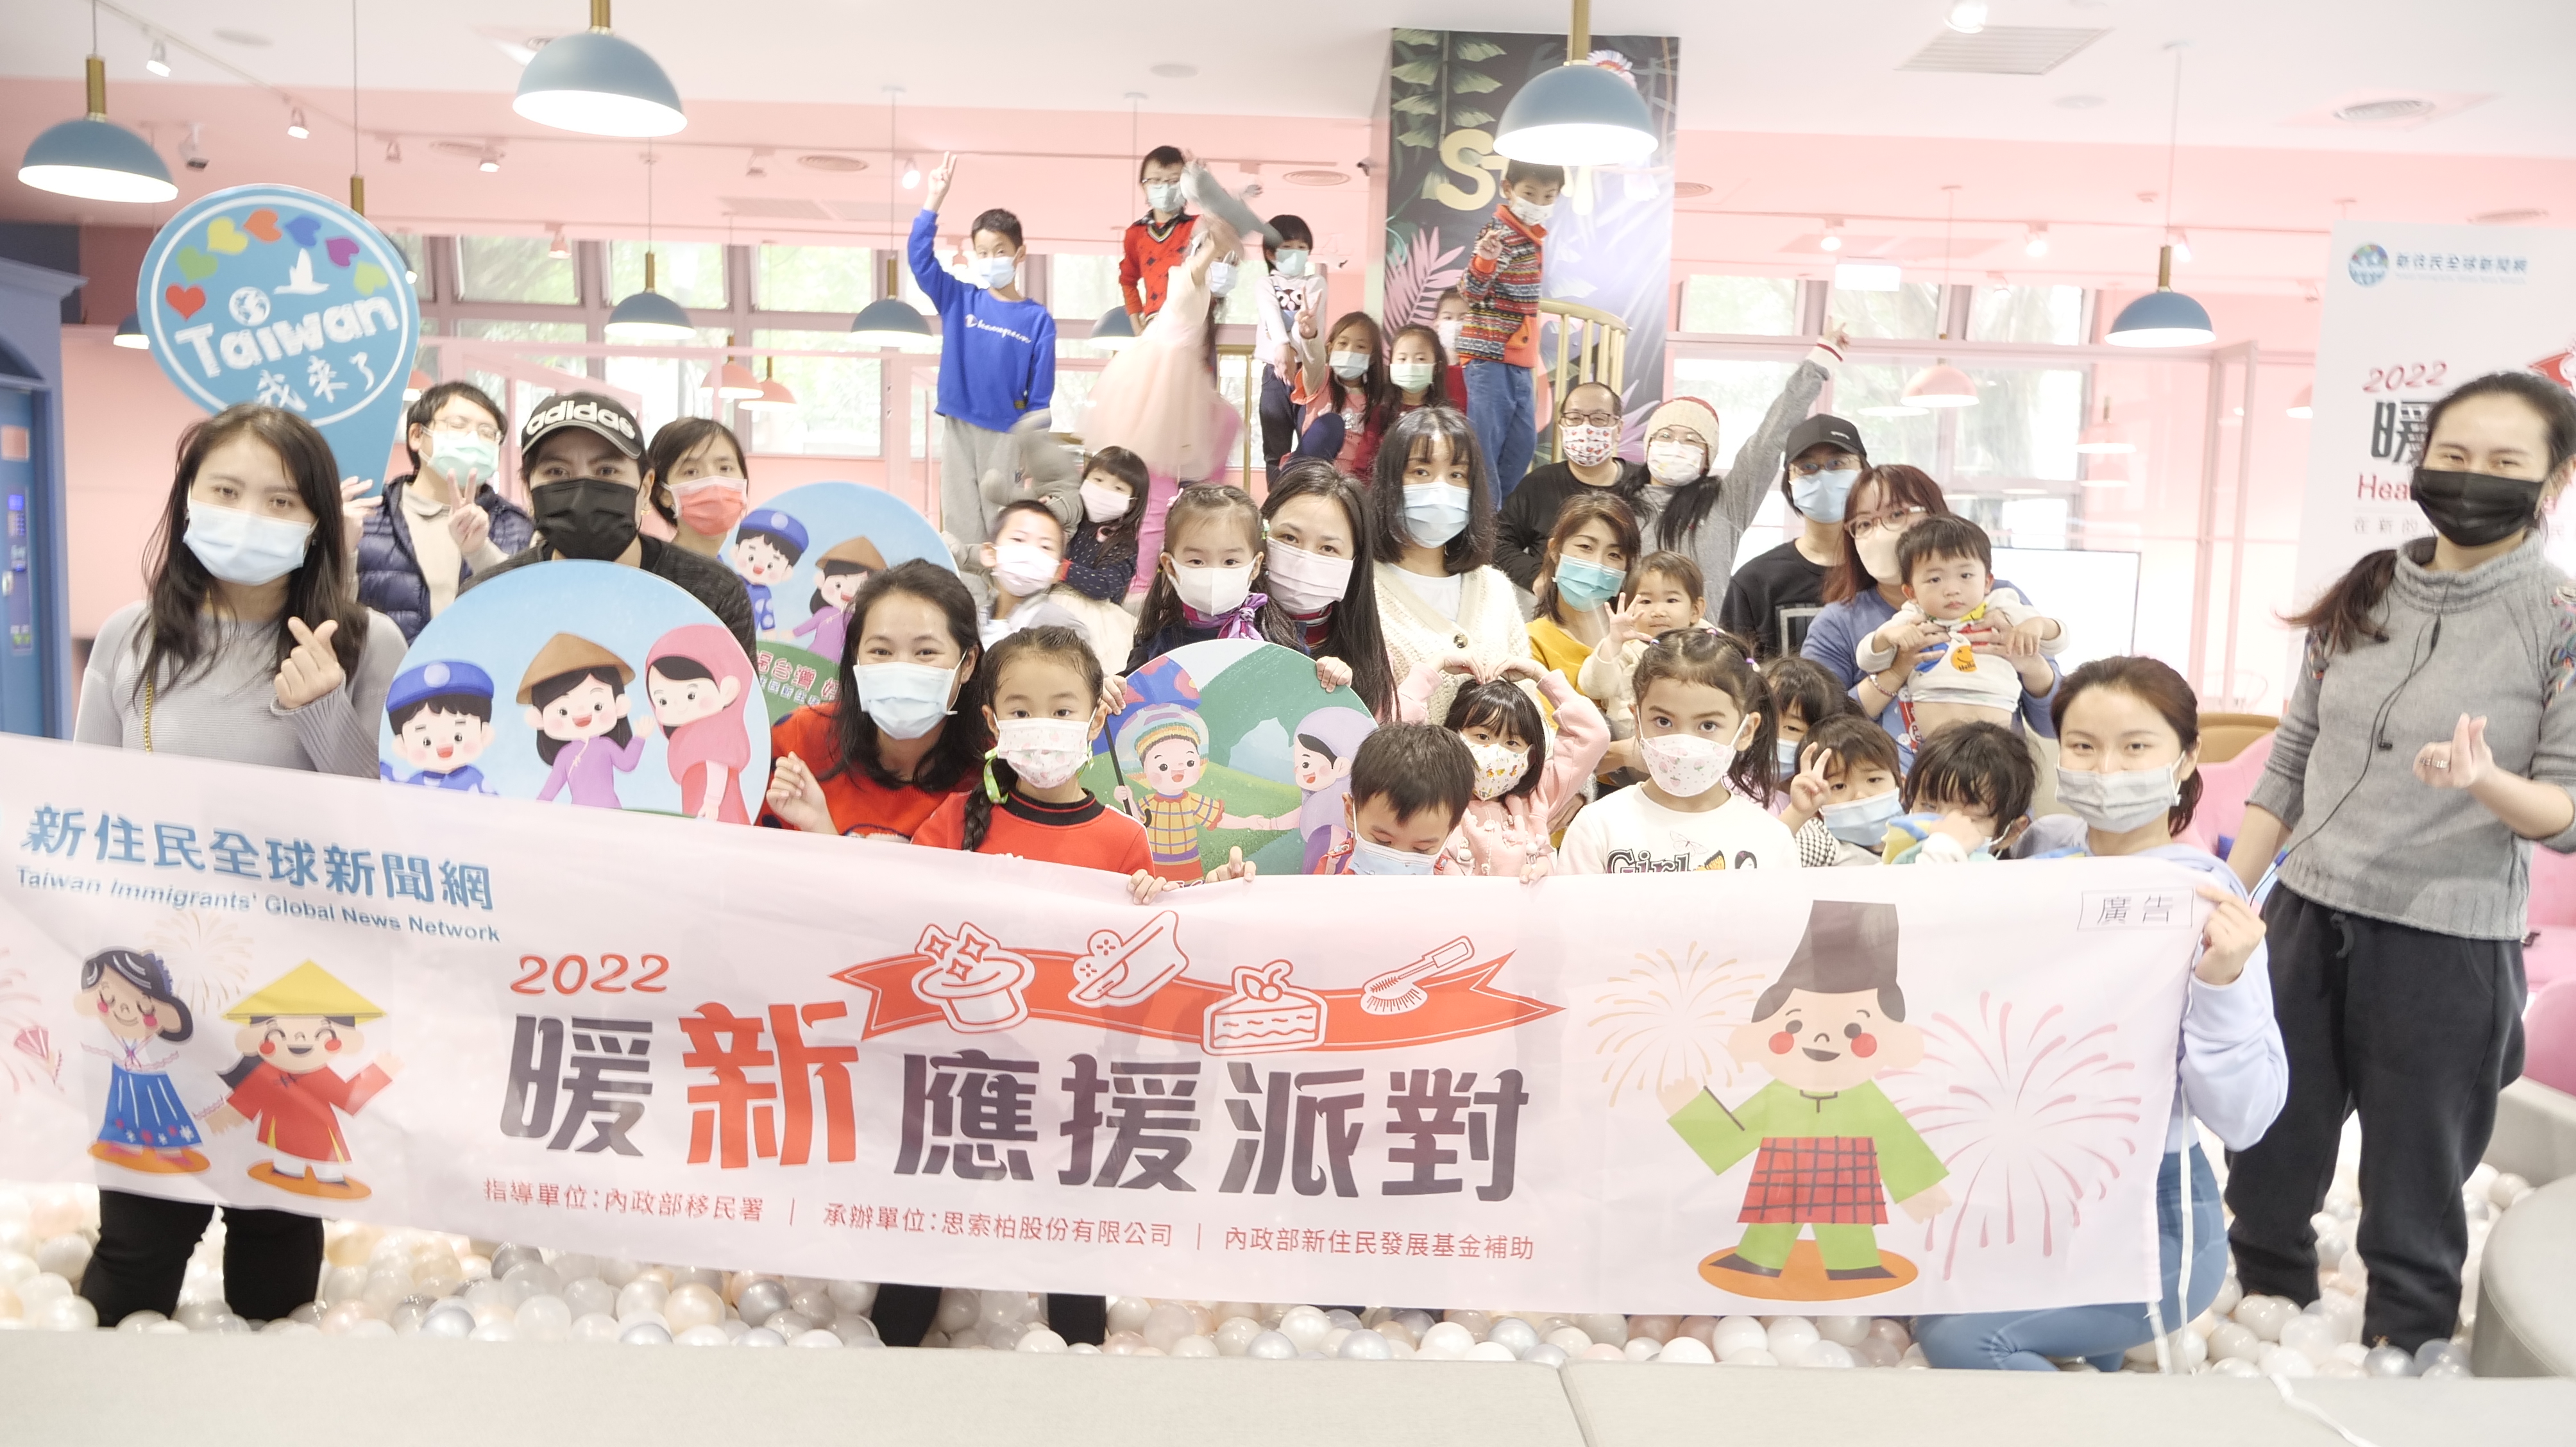 【Taiwan Immigrants' Global News Network】held a “New” Year Party” for new immigrants in Taiwan. (Photo / Provided by張睿弘)